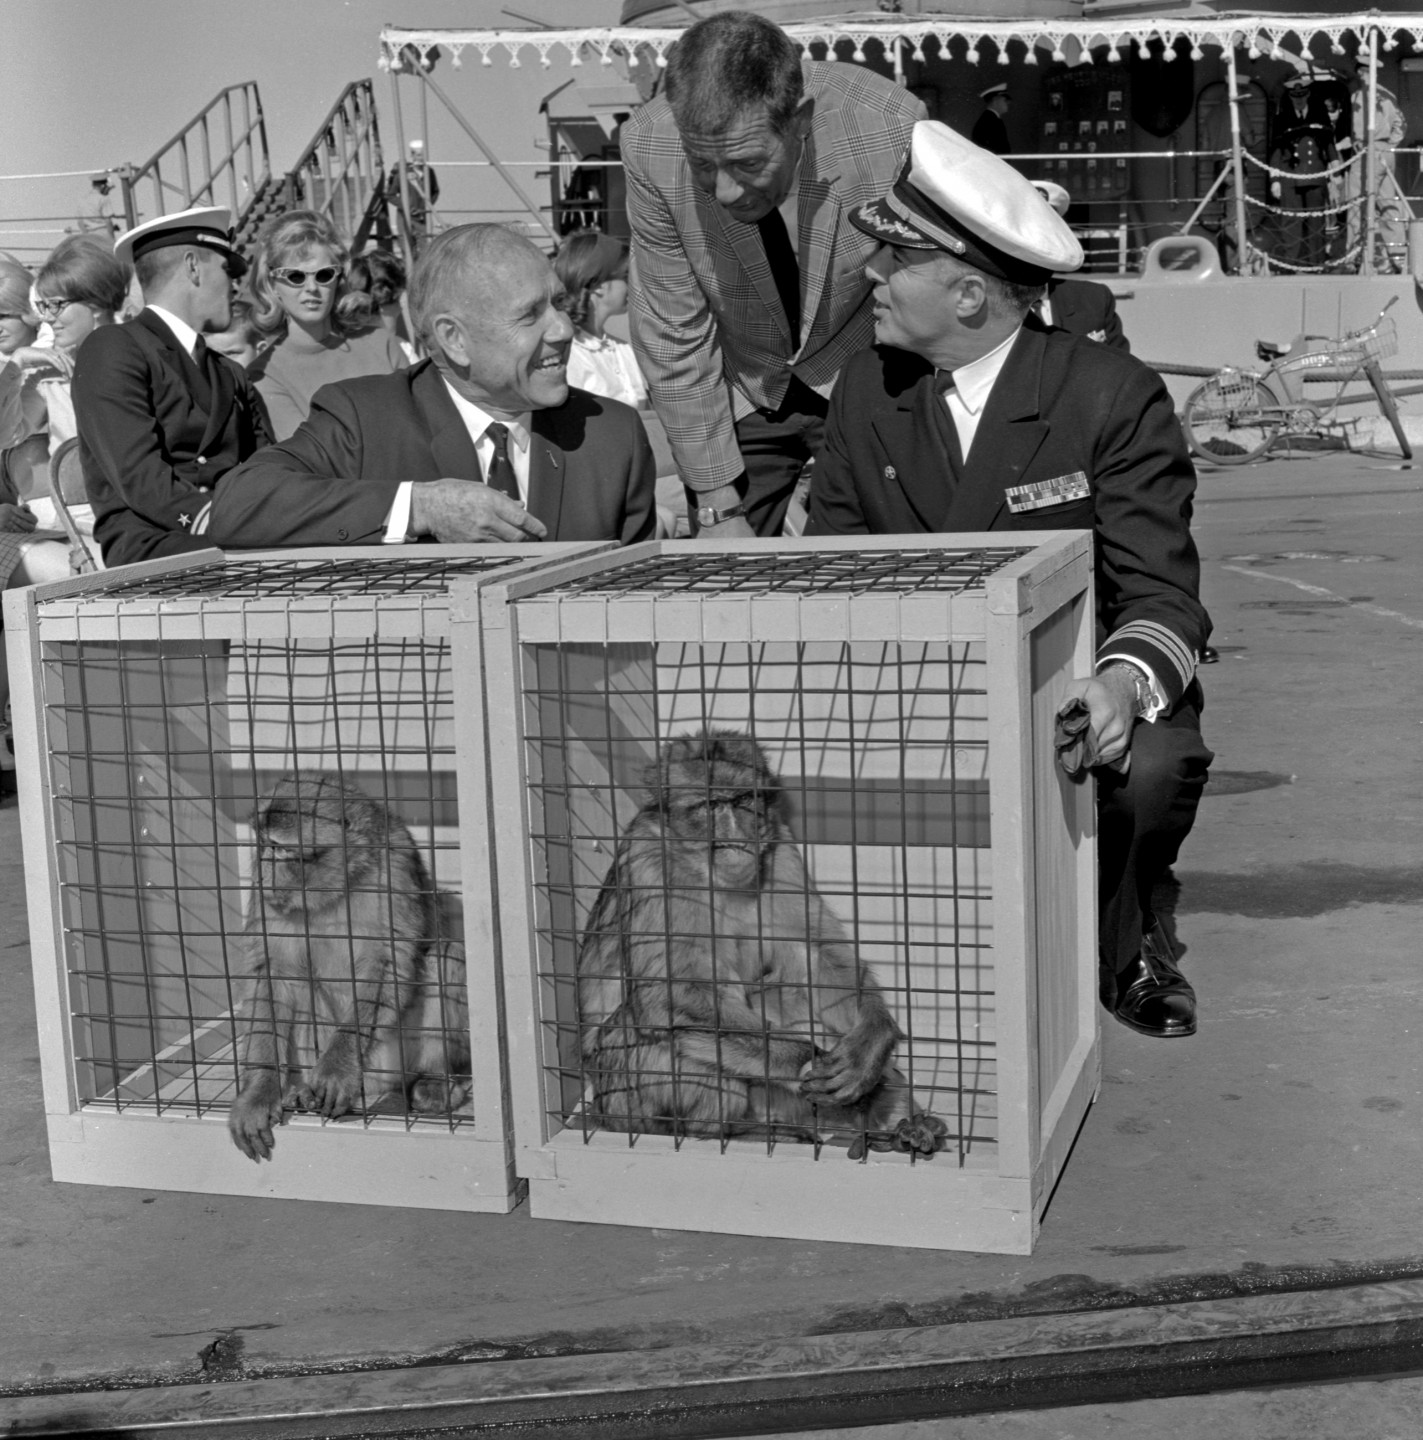 Zoo director Dr. Charles Schroeder (left) and Zoo mammal curator Dr. George Pournelle (center) were on hand to accept the extraordinary gift of two Barbary macaques, also known as the 